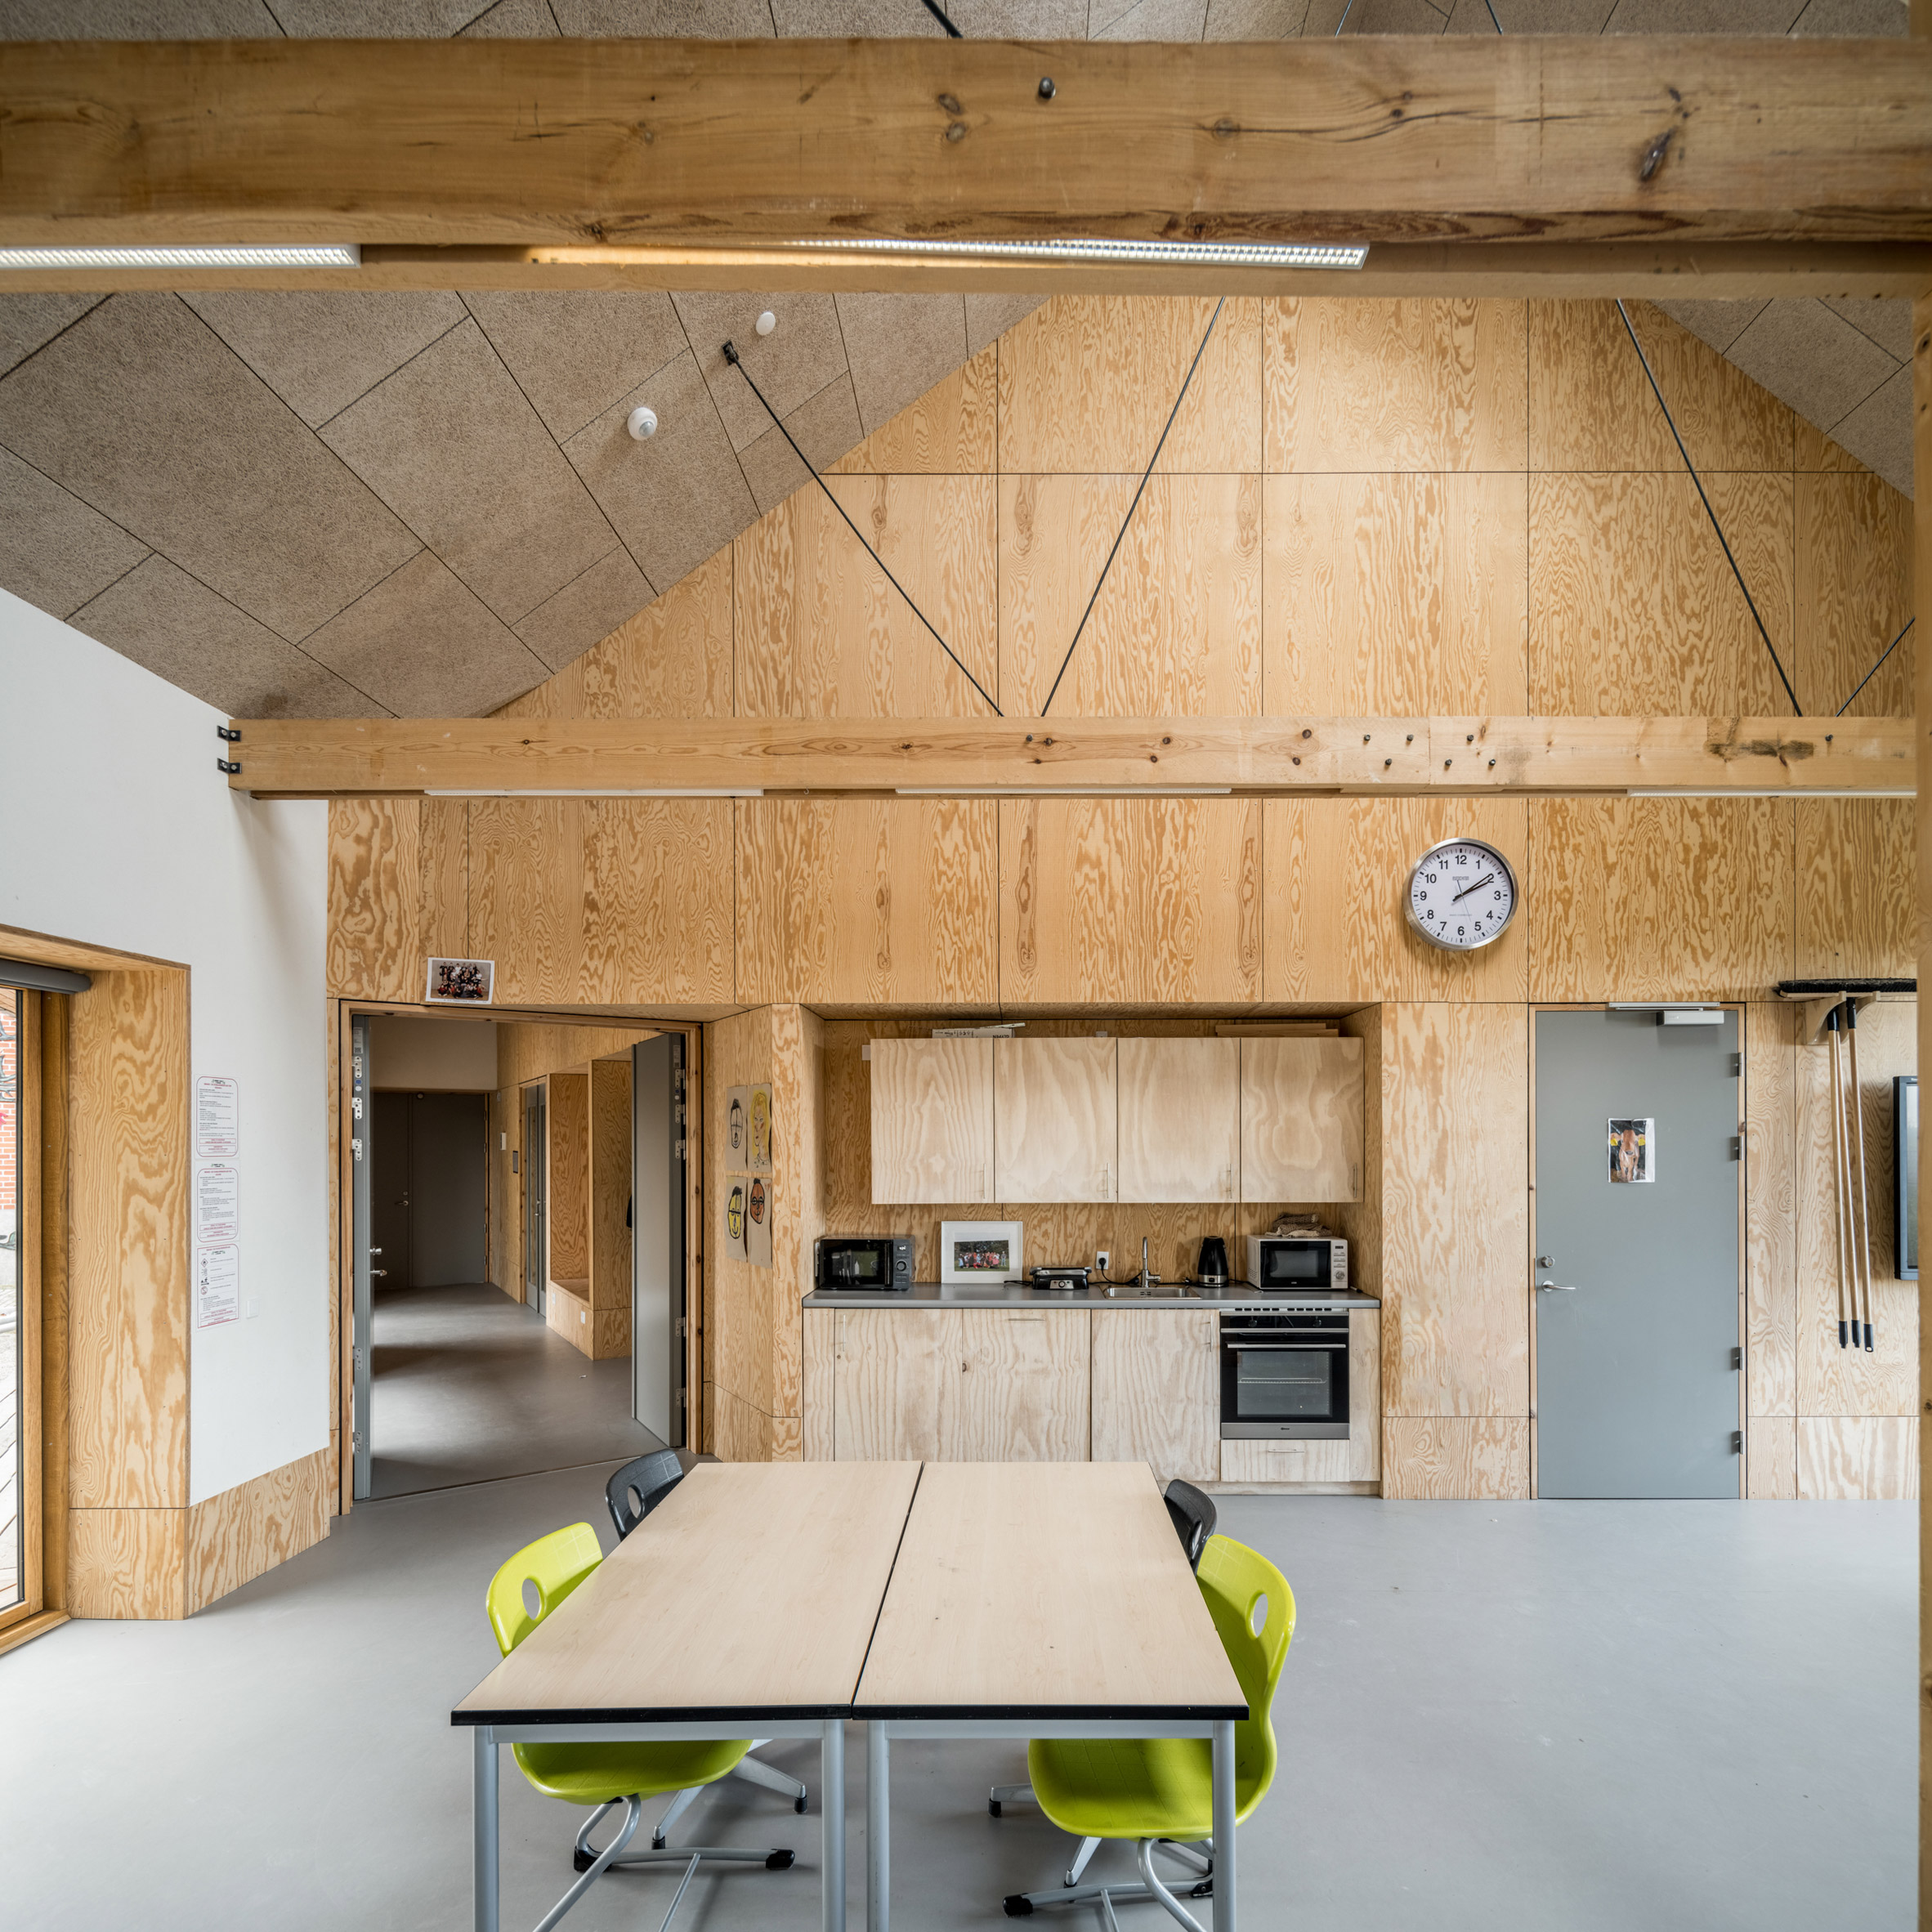 Classroom interior with wooden walls